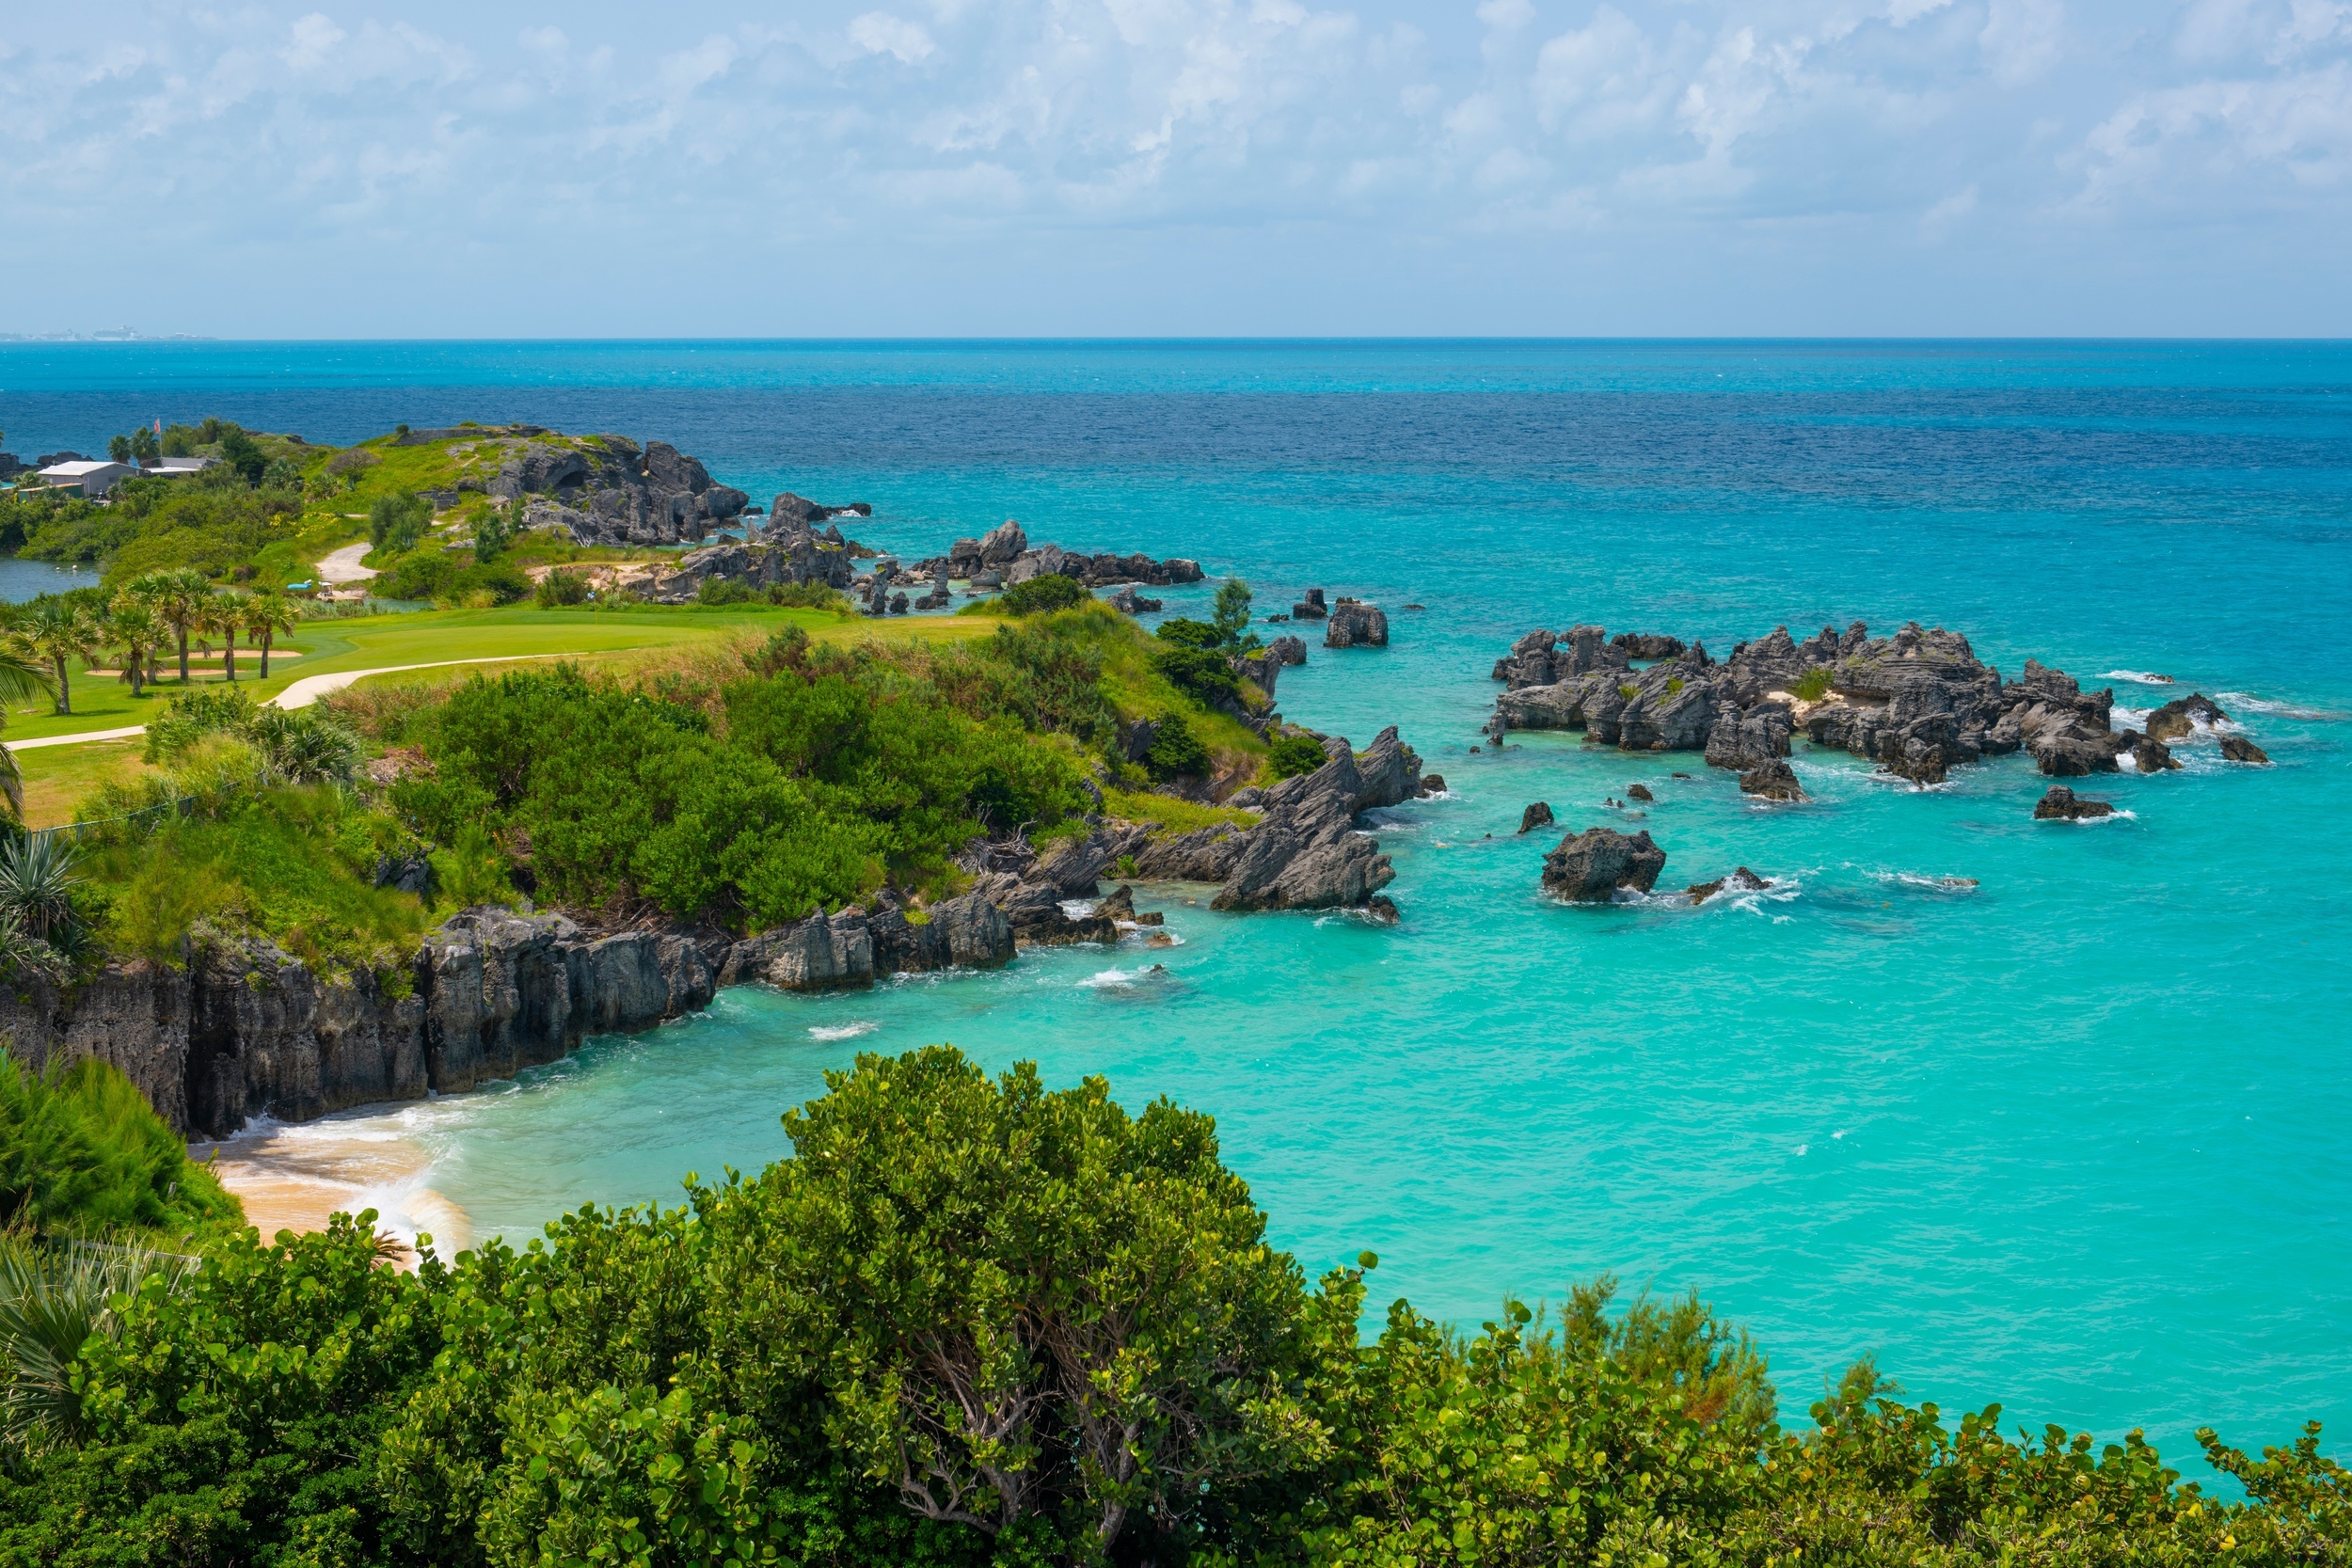 <p>Don’t worry. If you visit Bermuda, you most likely will not mysteriously disappear. This location is easier for United States citizens to get to than most tropical remote islands, and it’s well worth the visit as it has a developed infrastructure and beautiful pink sand beaches.  </p><p>You may also like: <a href='https://www.yardbarker.com/lifestyle/articles/20_reasons_having_kids_isnt_for_everyone_right_now/s1__40092877'>20 reasons having kids isn’t for everyone right now</a></p>